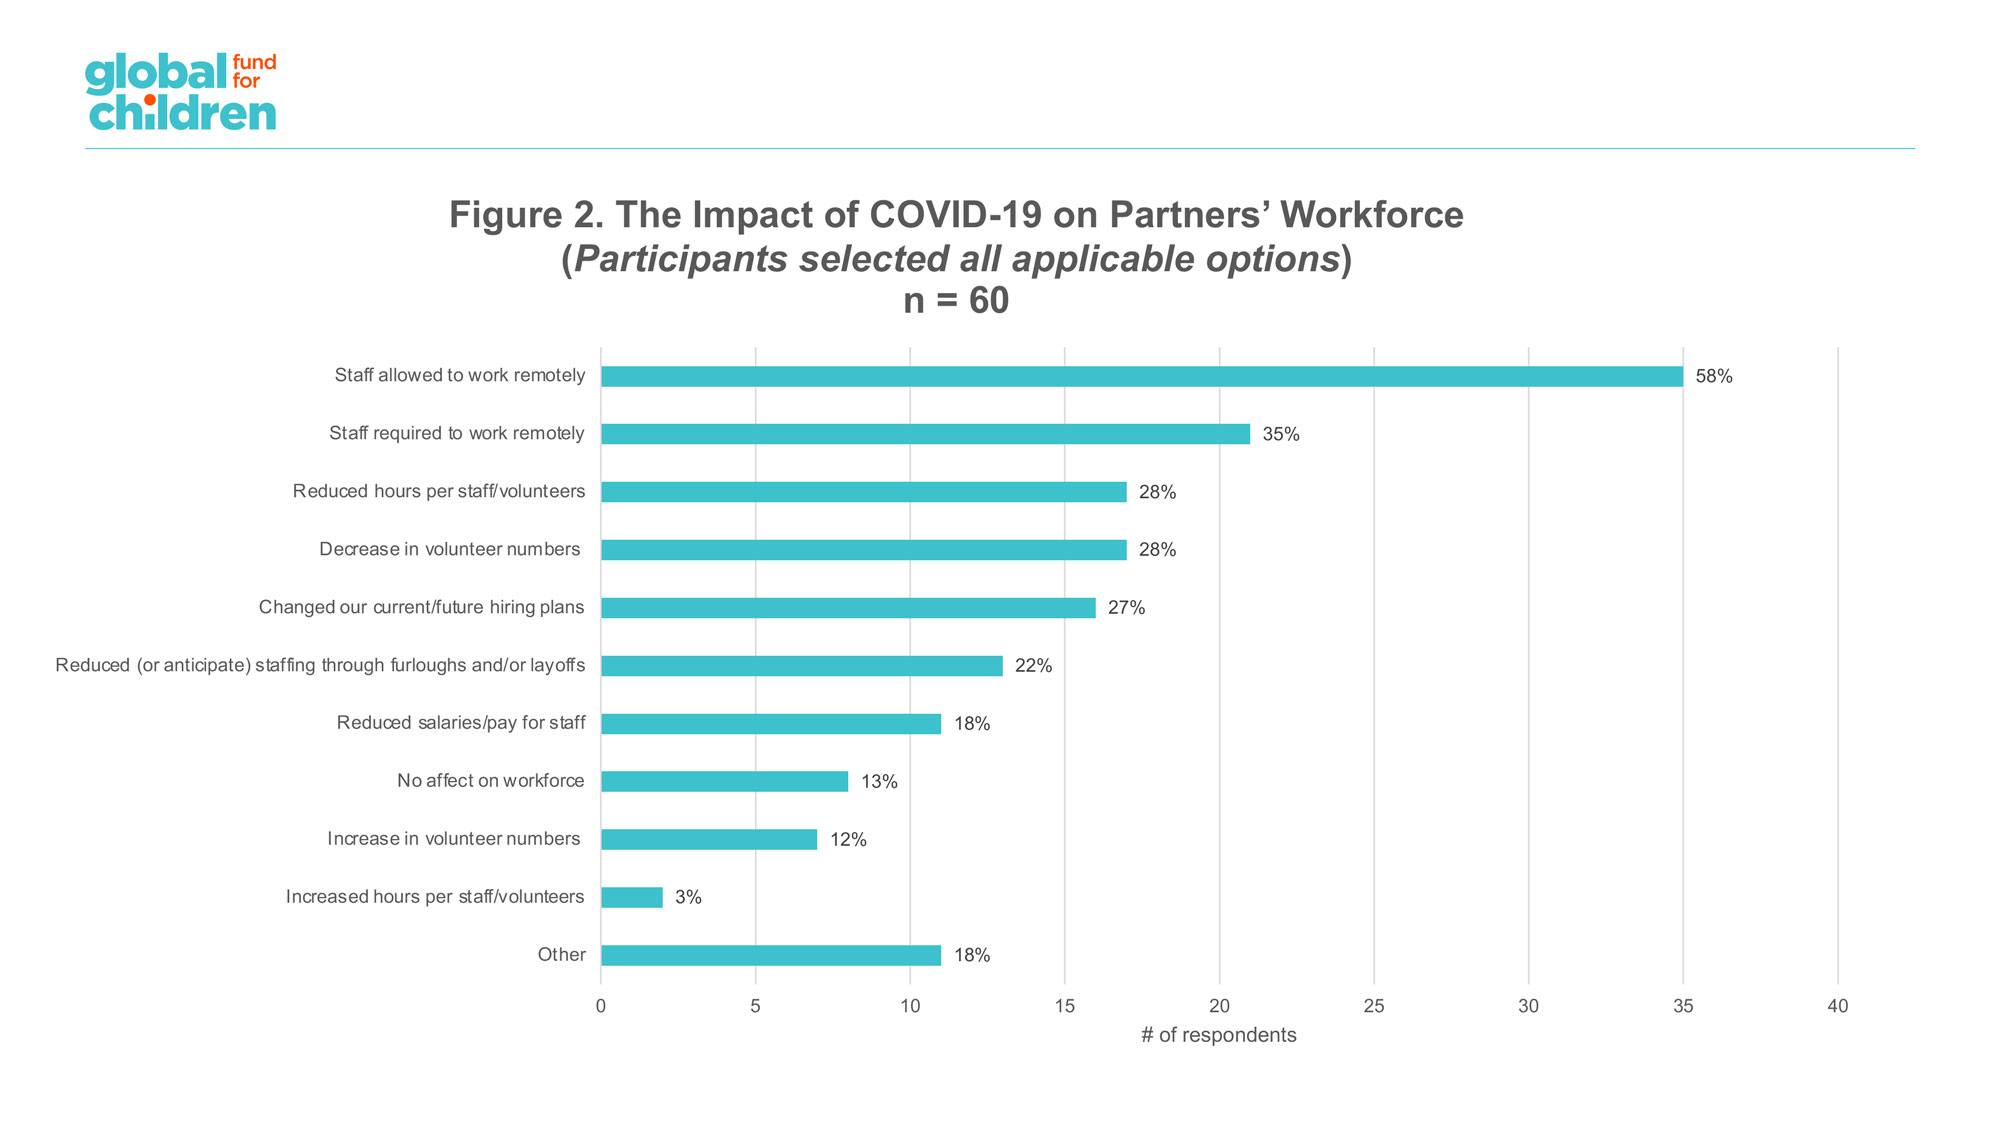 Figure 2. The Impact of COVID-19 on Partners’ Workforce